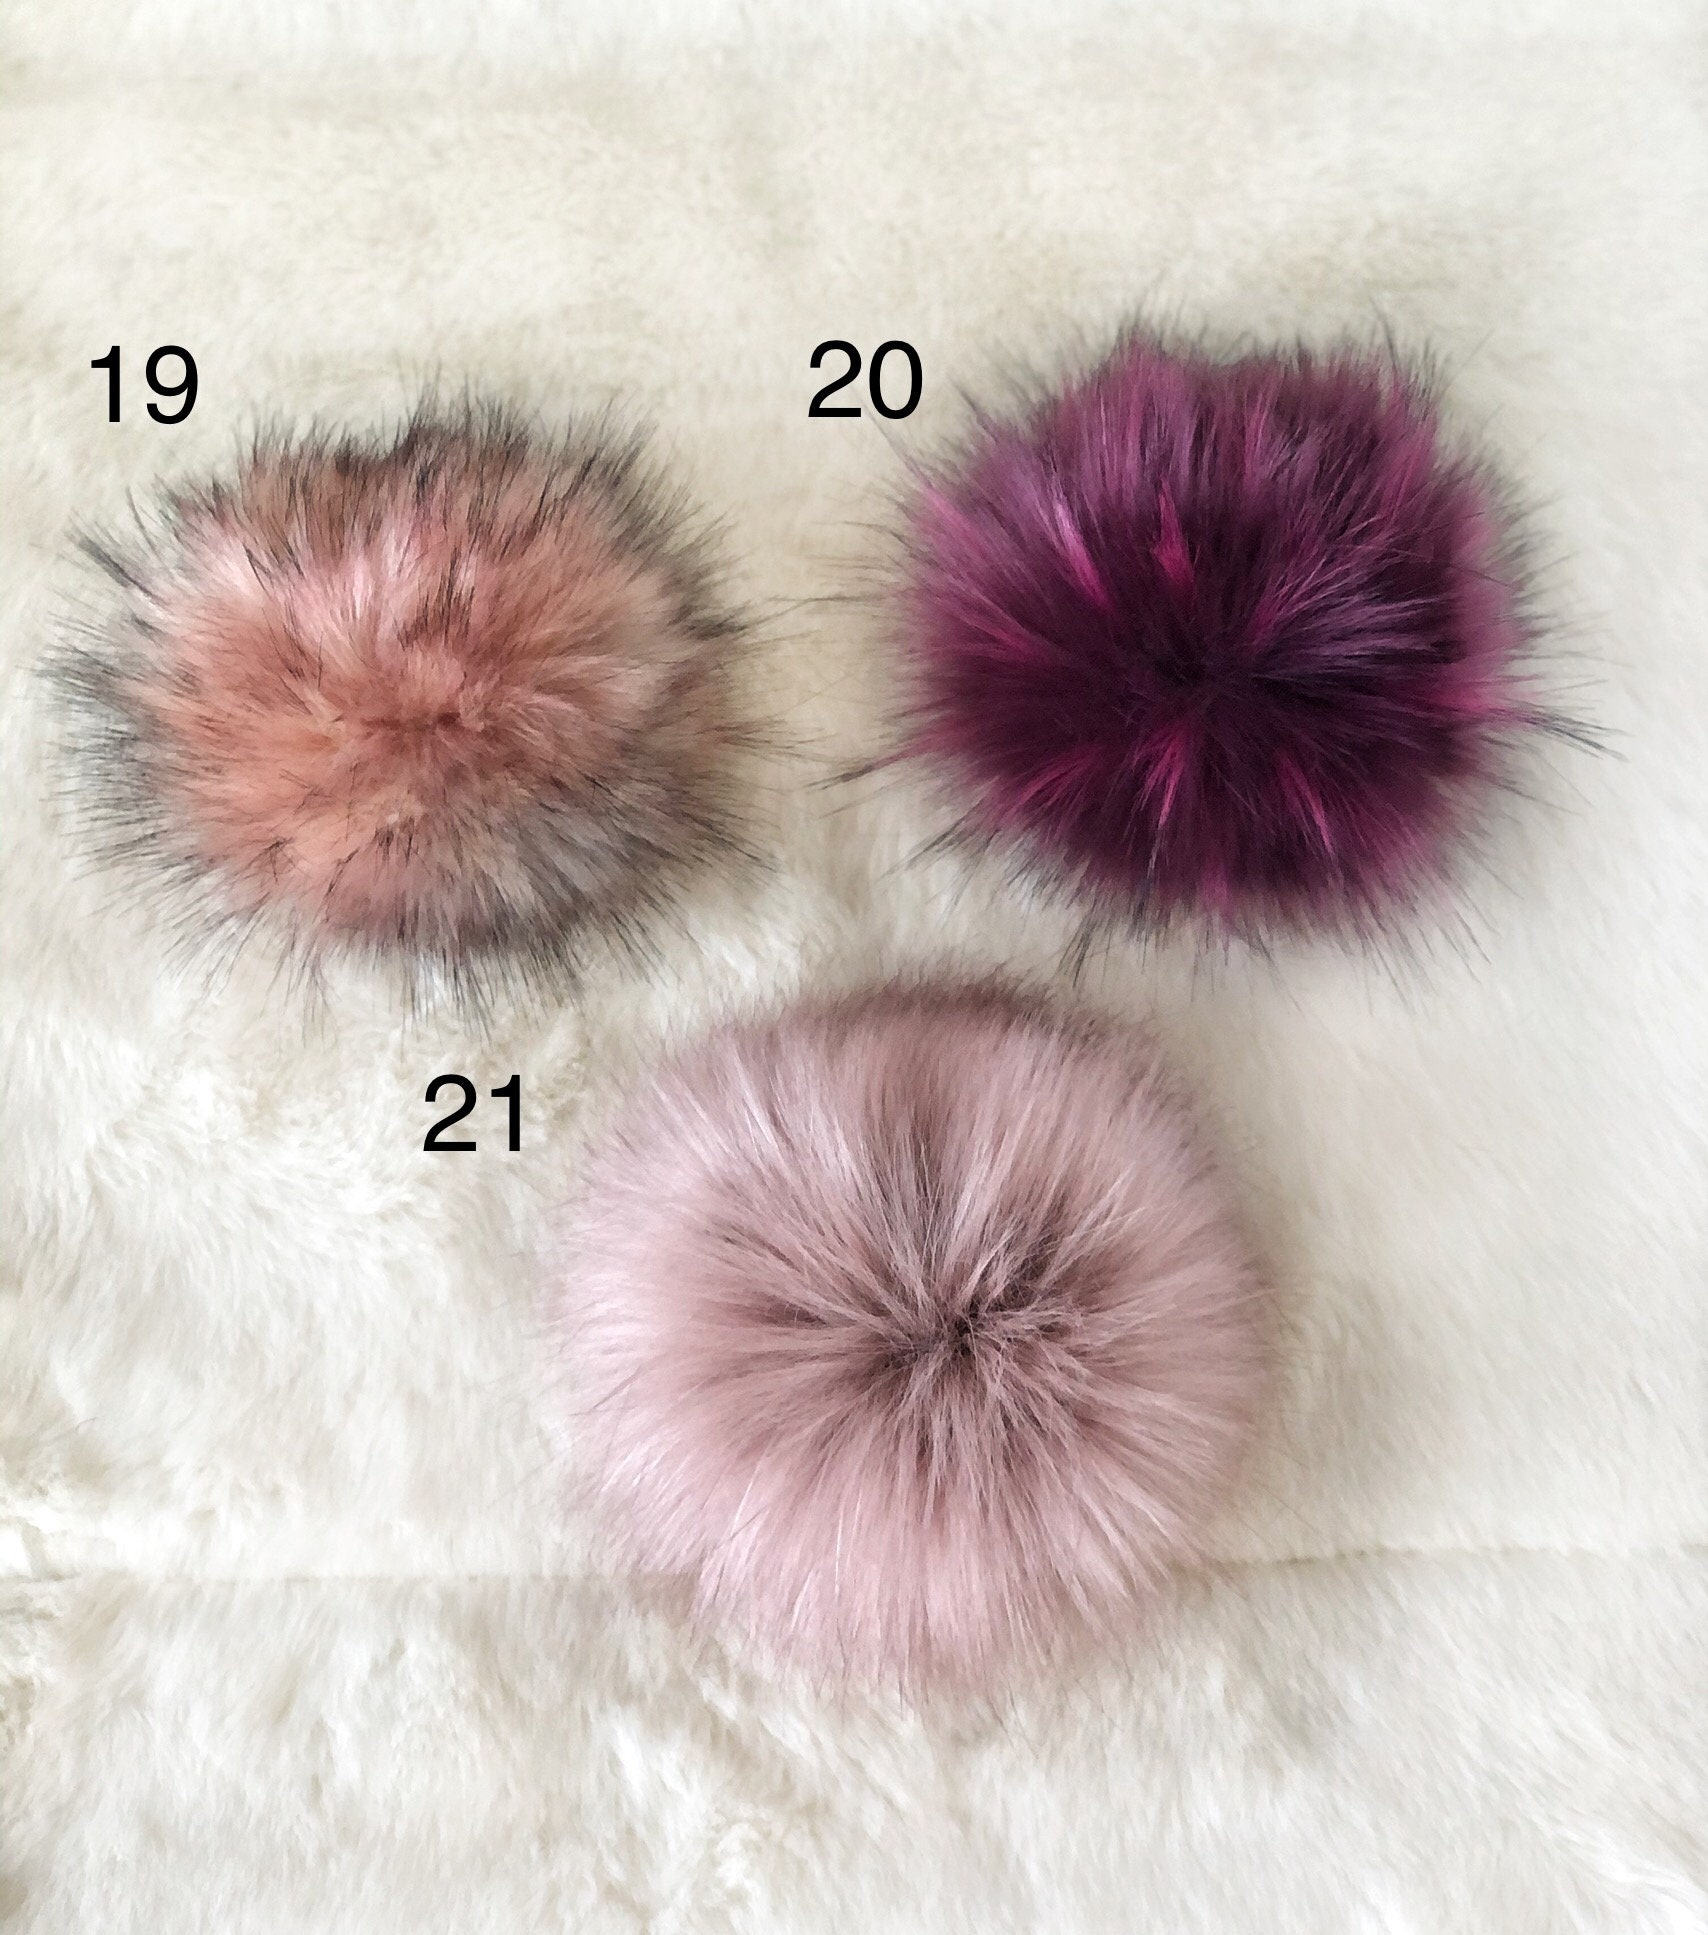  Snap On Pom Poms For Hats